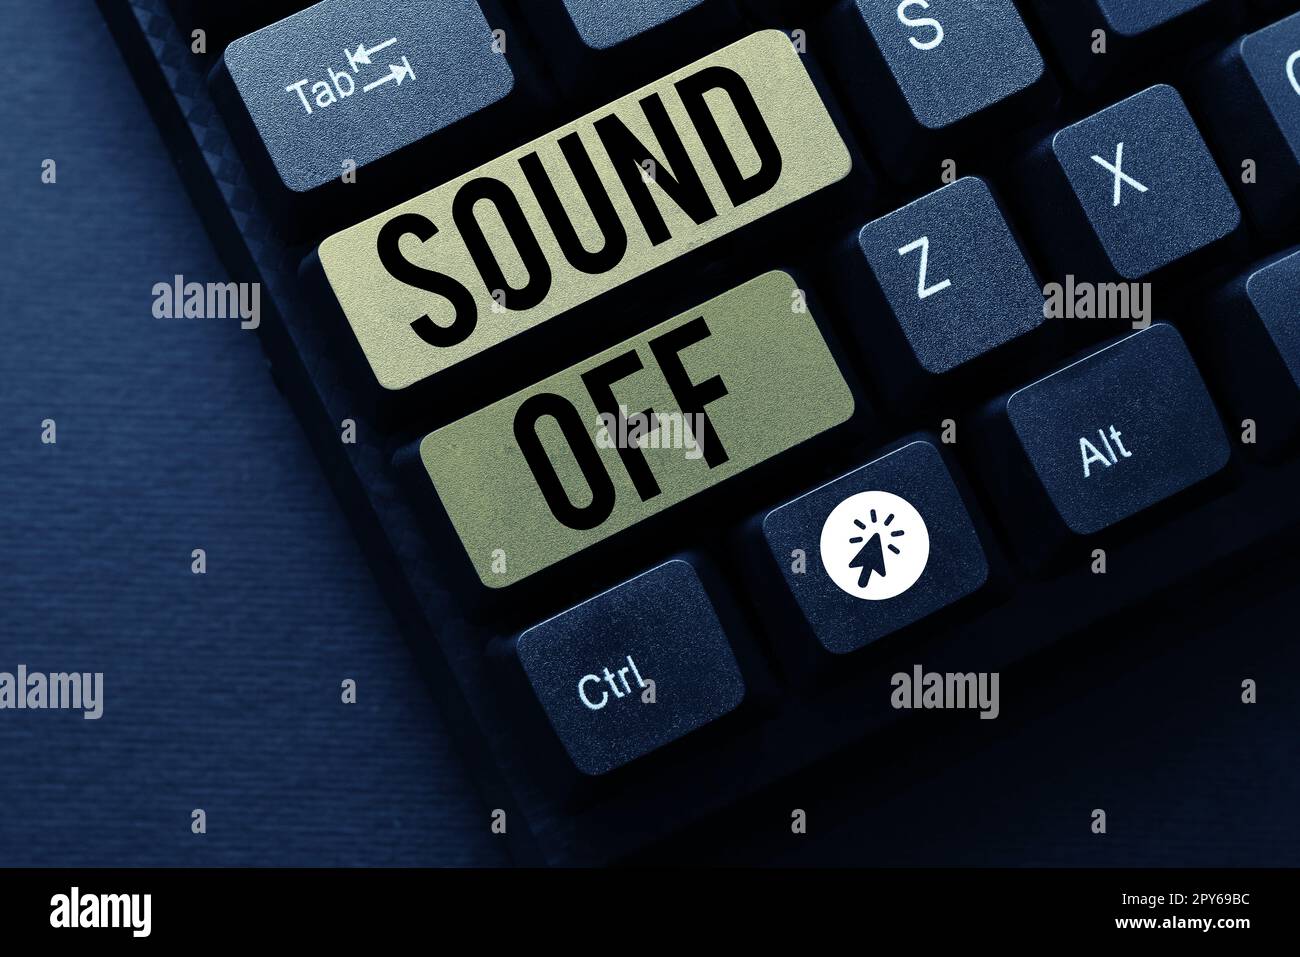 Sign displaying Sound Off. Concept meaning To not hear any kind of sensation produced by stimulation Stock Photo